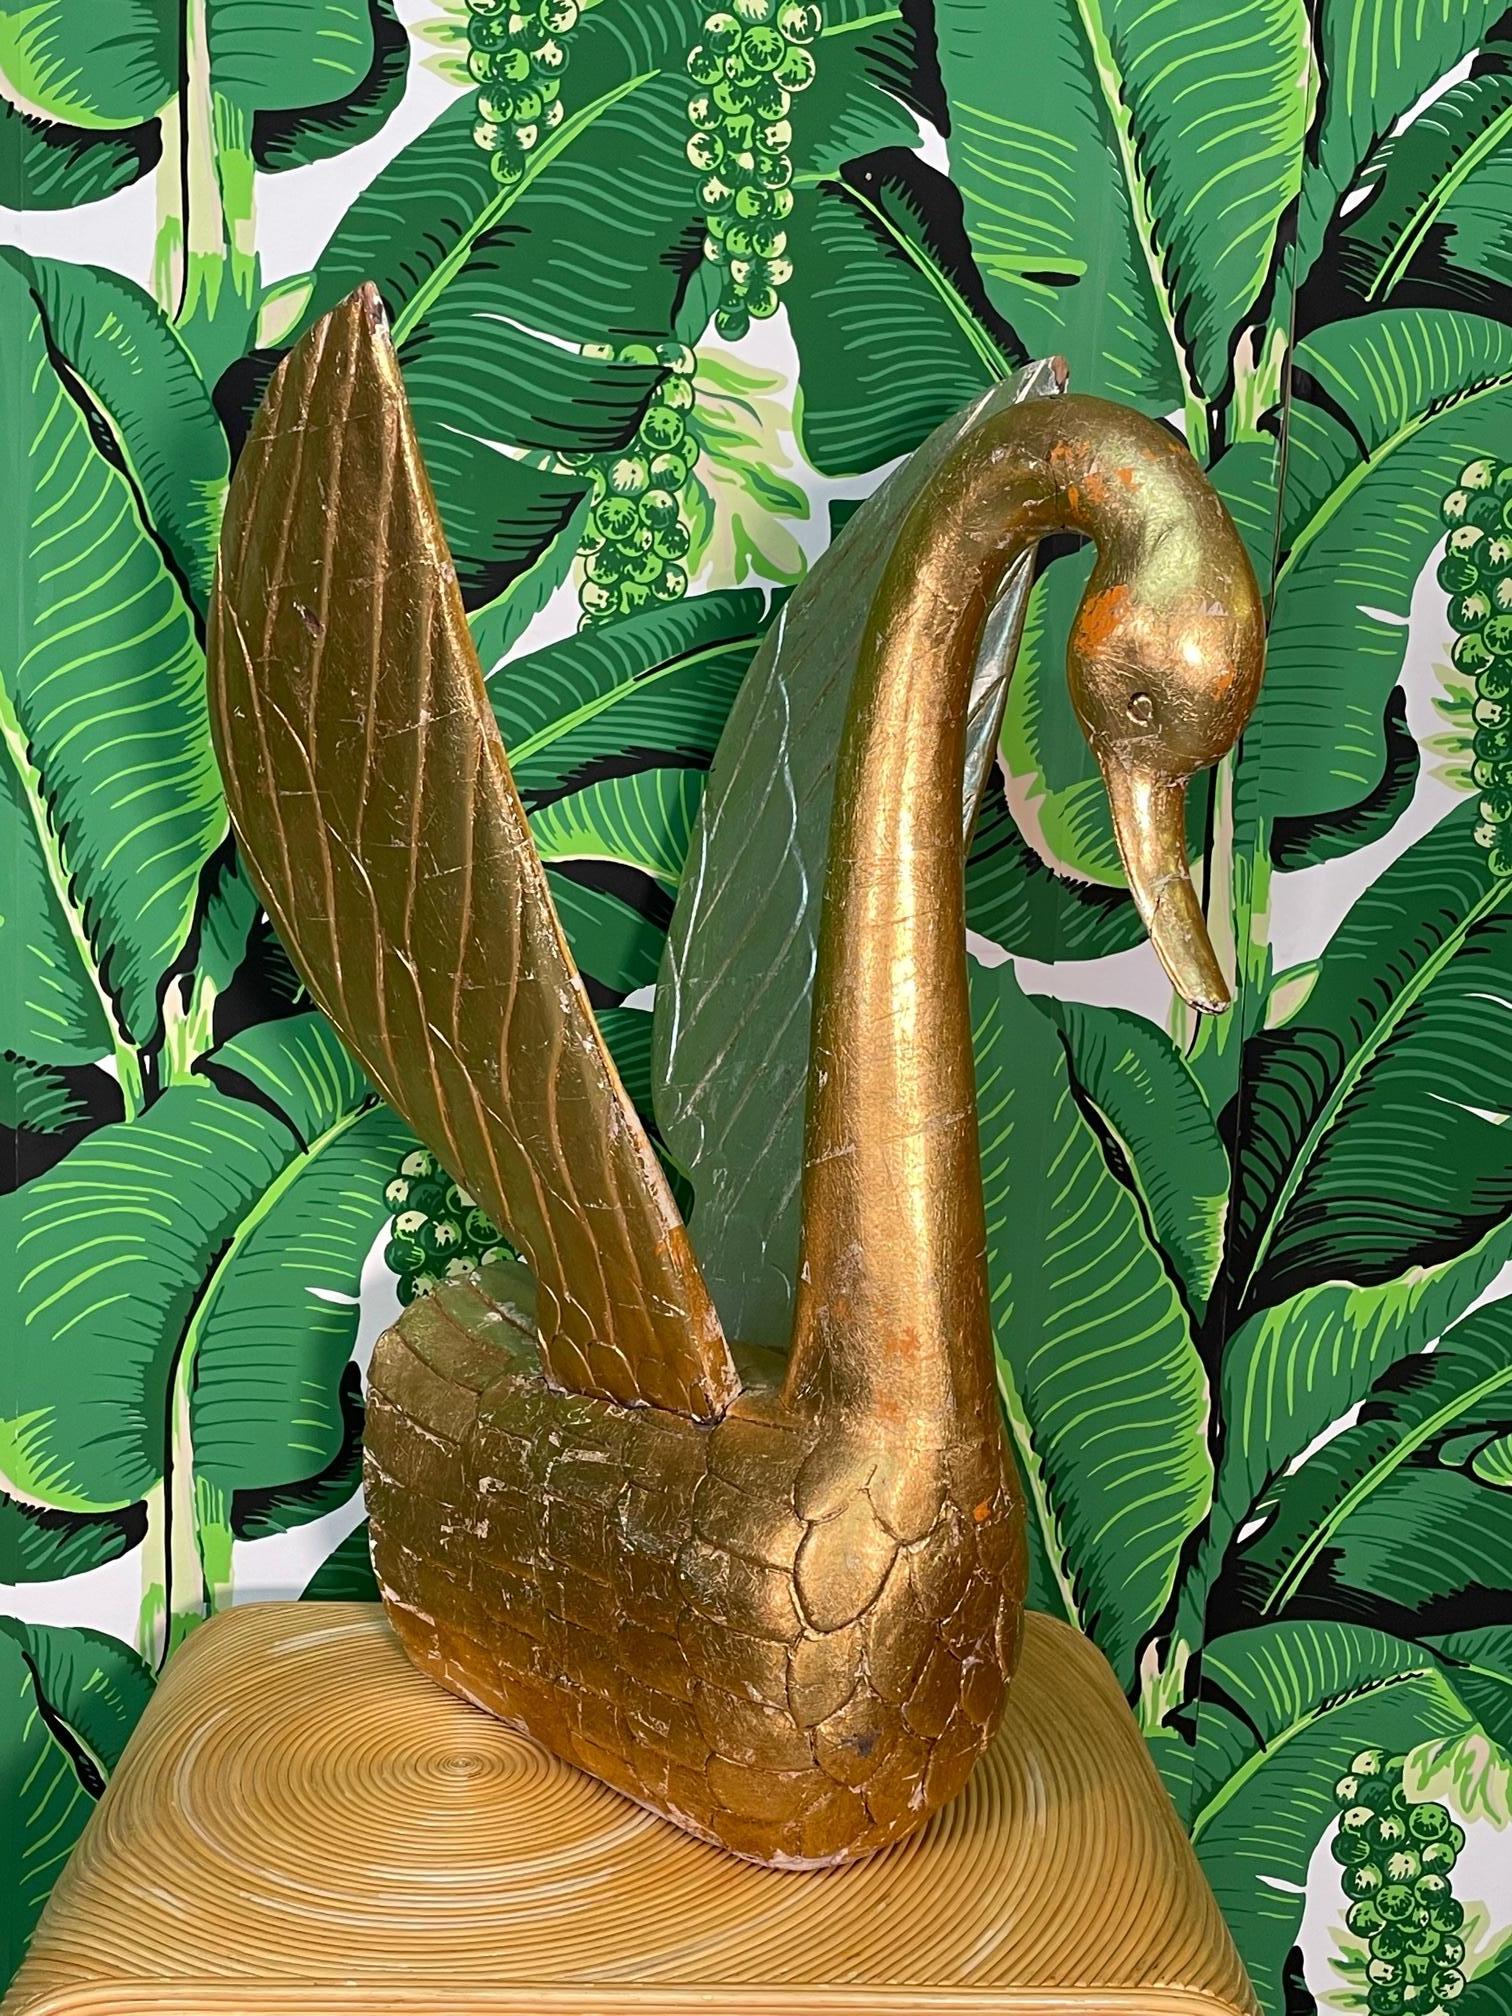 Large hand carved solid wood swan figurine with full gold leaf veneer. Intricate design and lovely patina. Good condition with imperfections consistent with age (see photos).